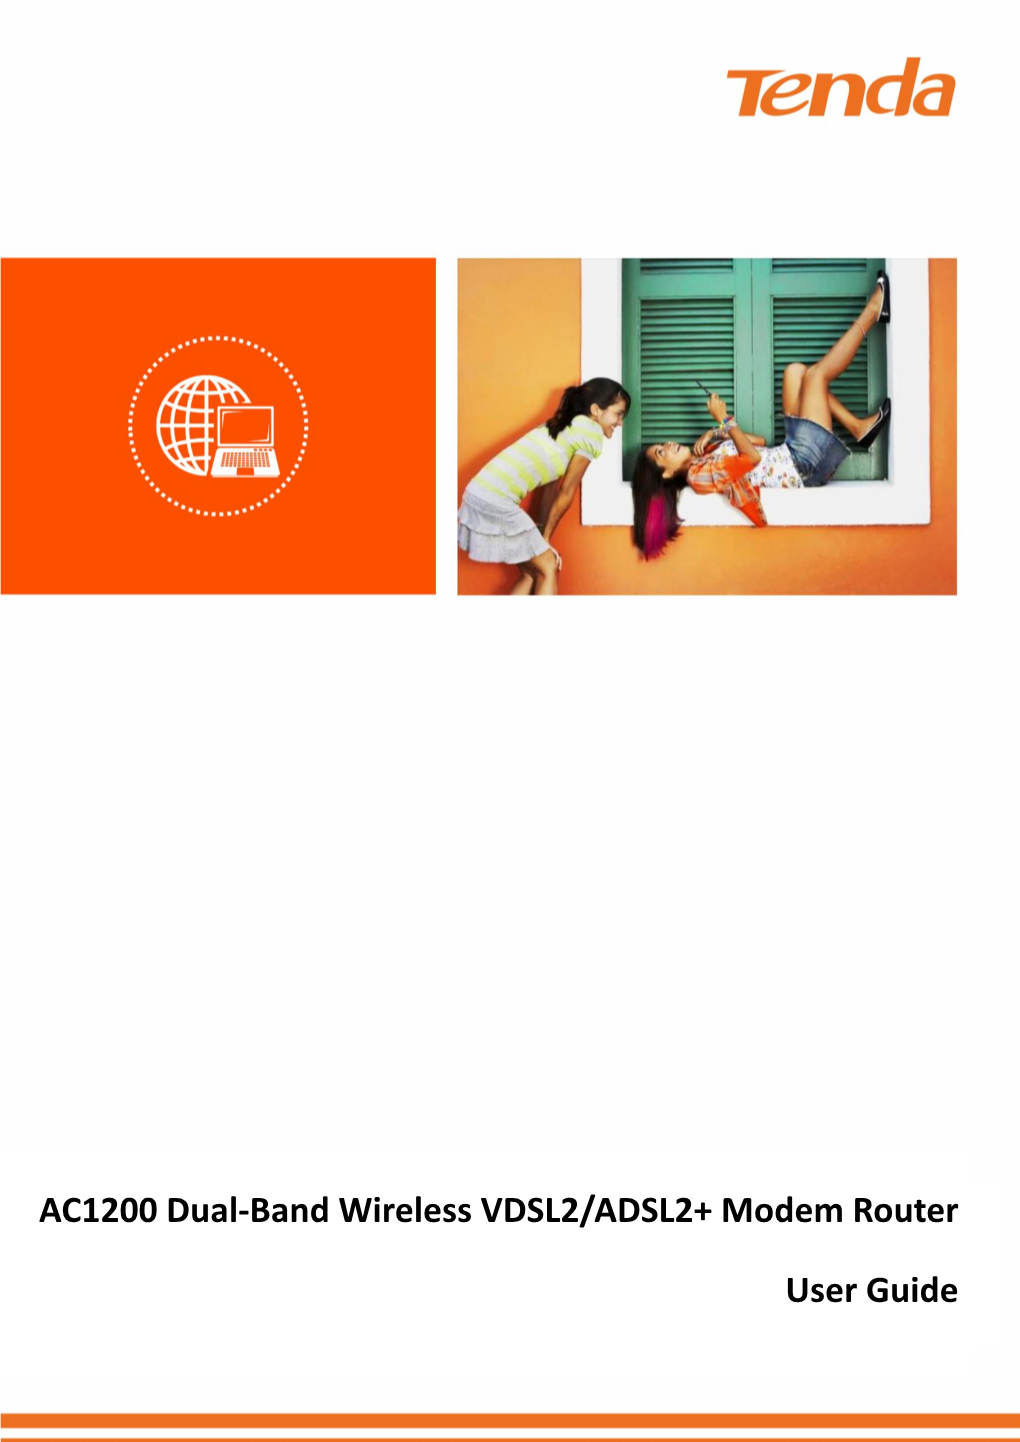 AC1200 Dual-Band Wireless VDSL2/ADSL2+ Modem Router User Guide